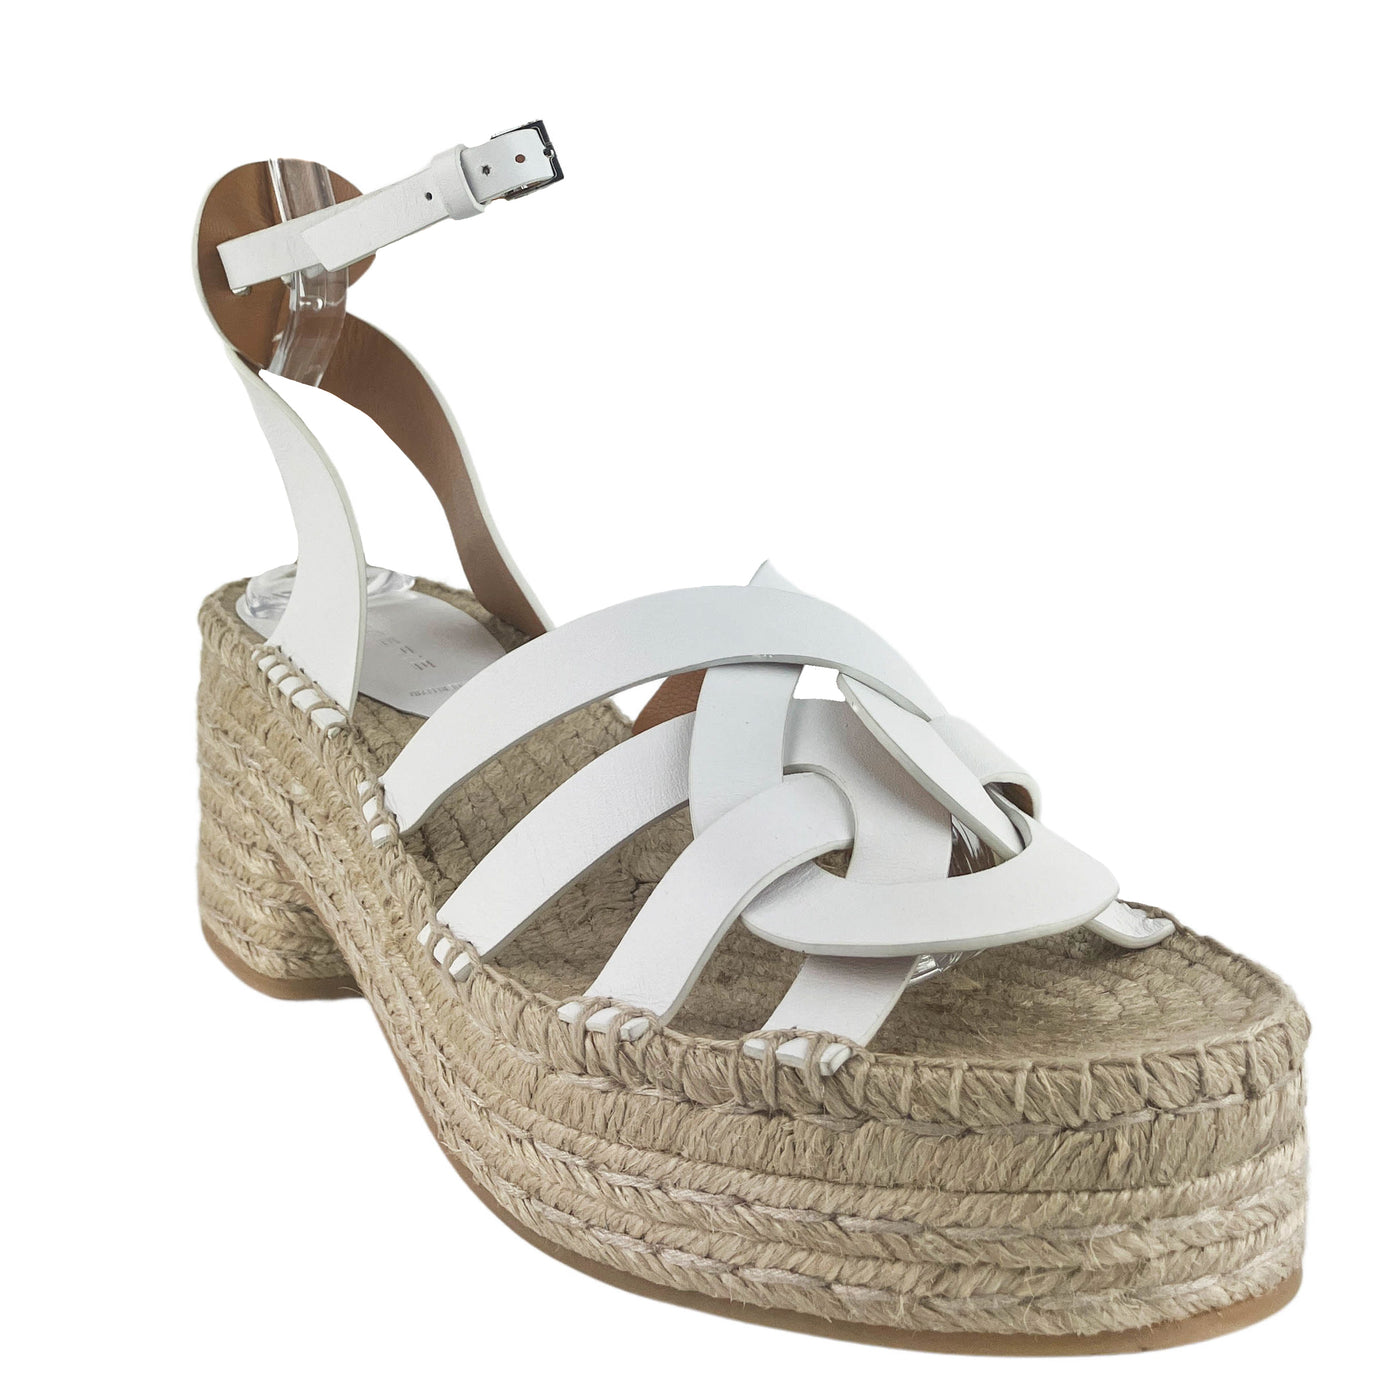 Clergerie Chaya Sandals in White - Discounts on Clergerie at UAL